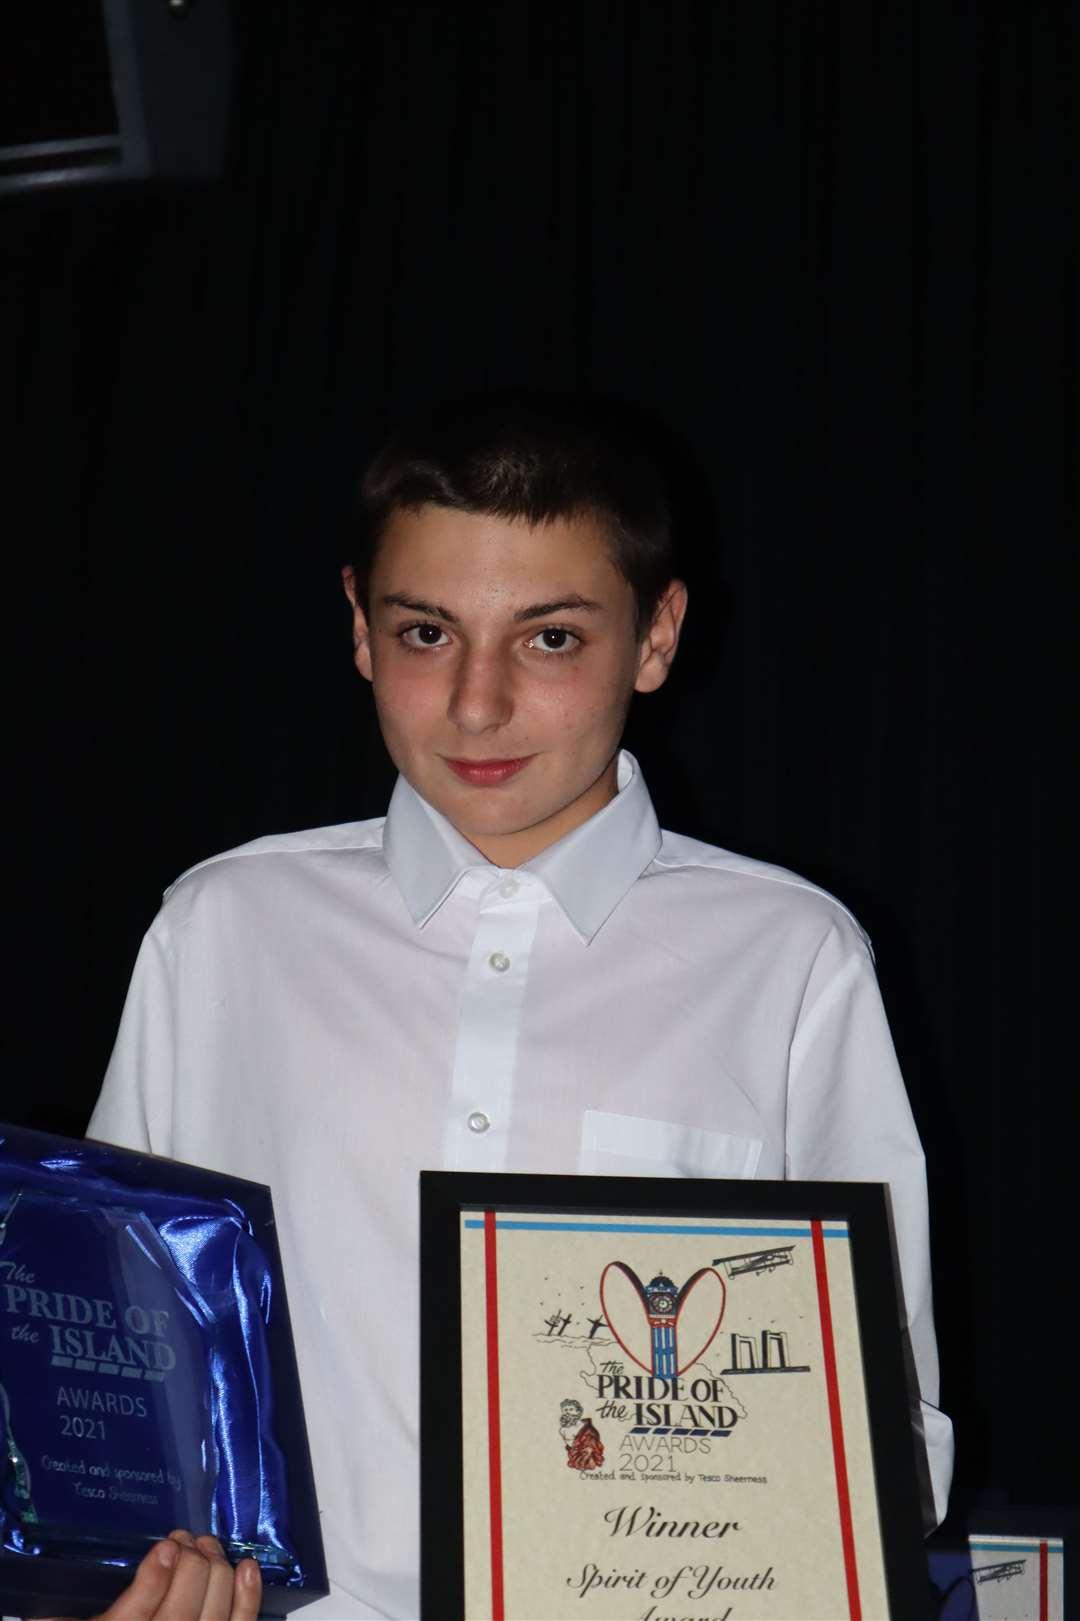 Newspaper boy Leo Jacob won the Spirit of Youth title in the Tesco Pride of the Island awards